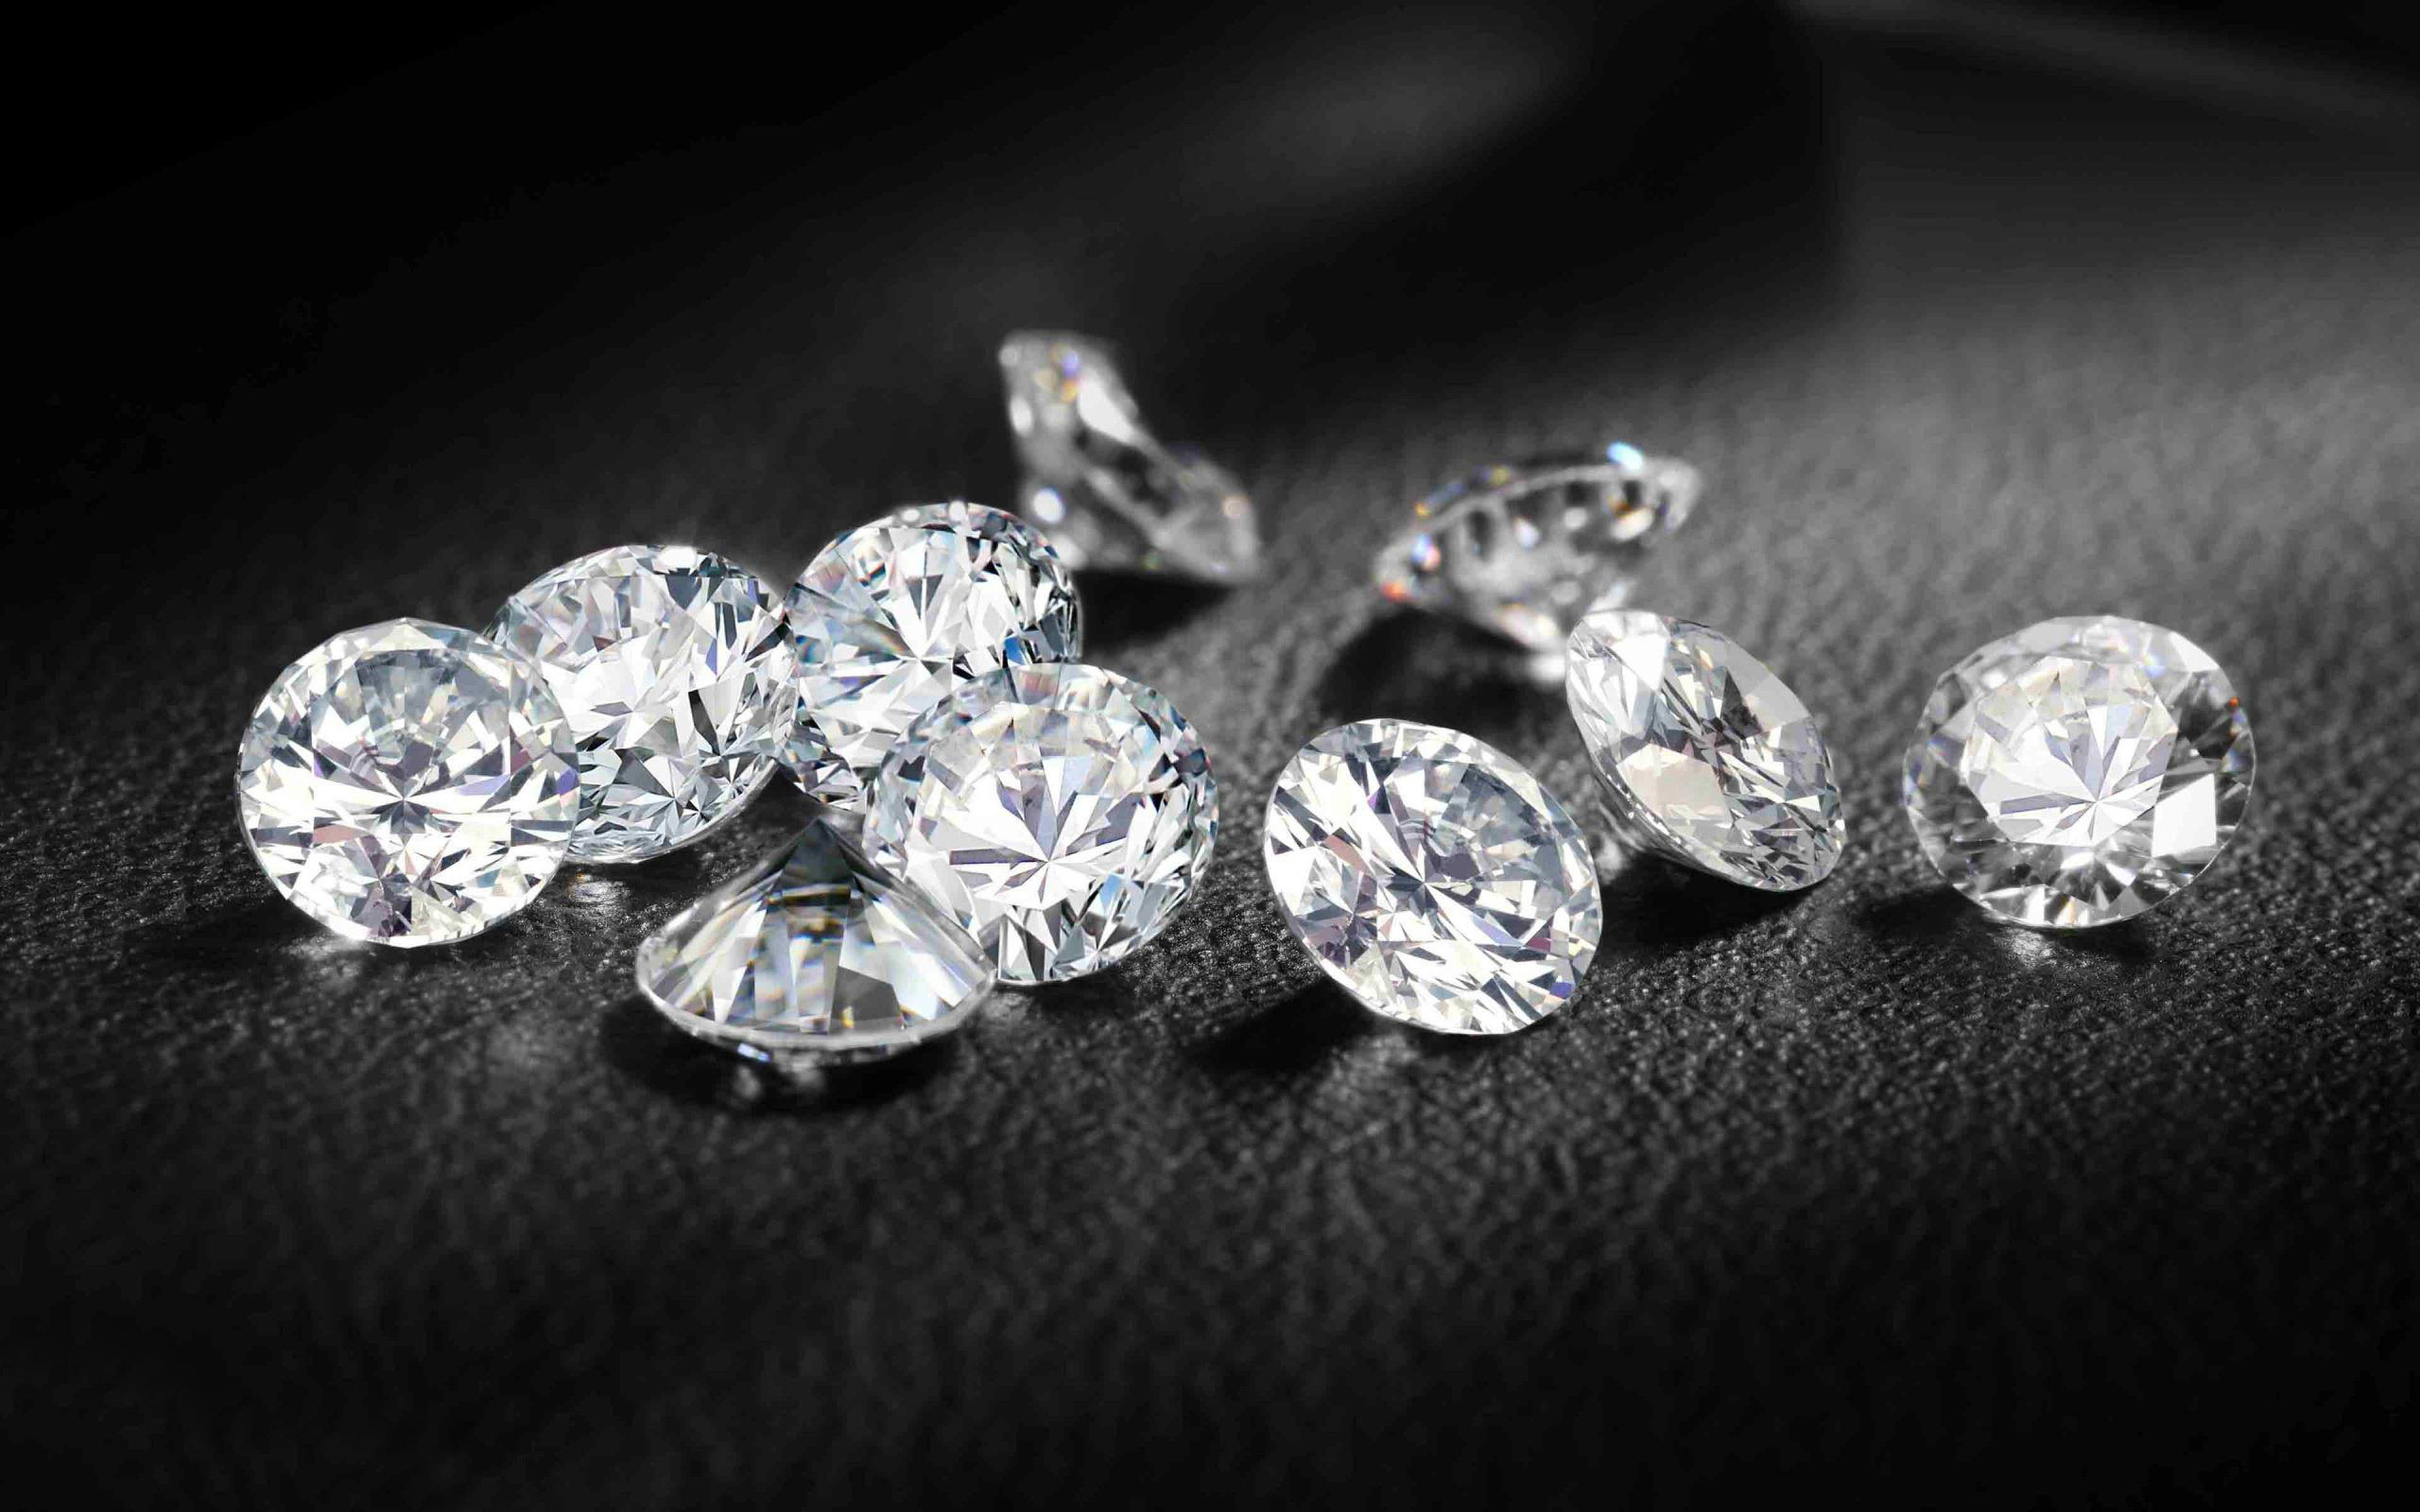 Diamond Wallpaper Hd posted by Christopher Thompson